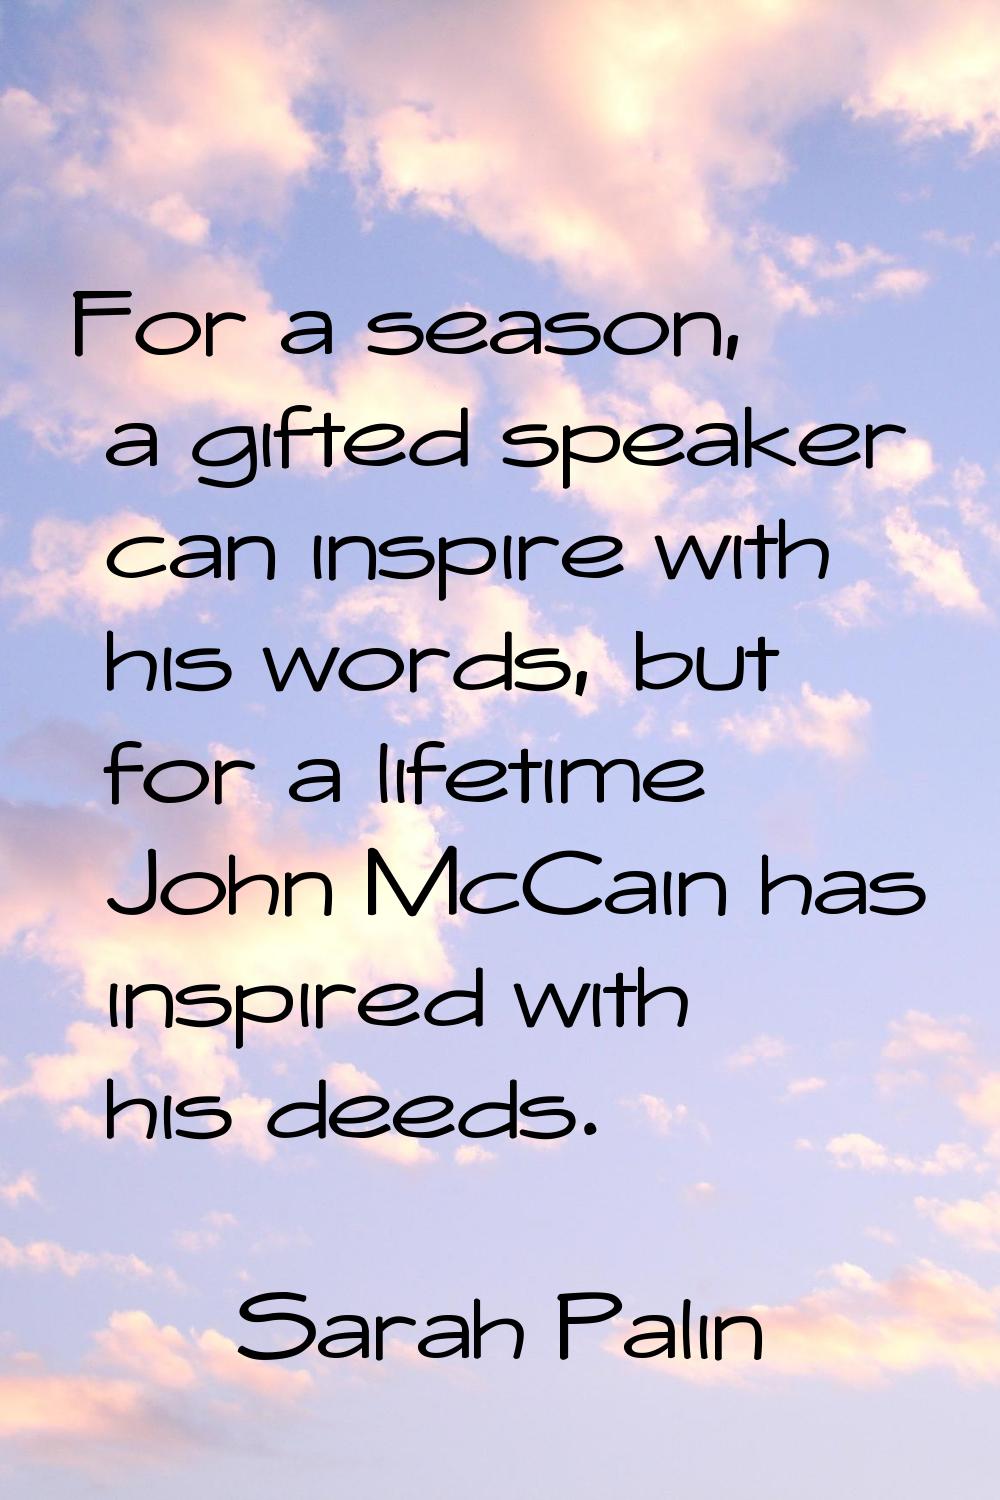 For a season, a gifted speaker can inspire with his words, but for a lifetime John McCain has inspi